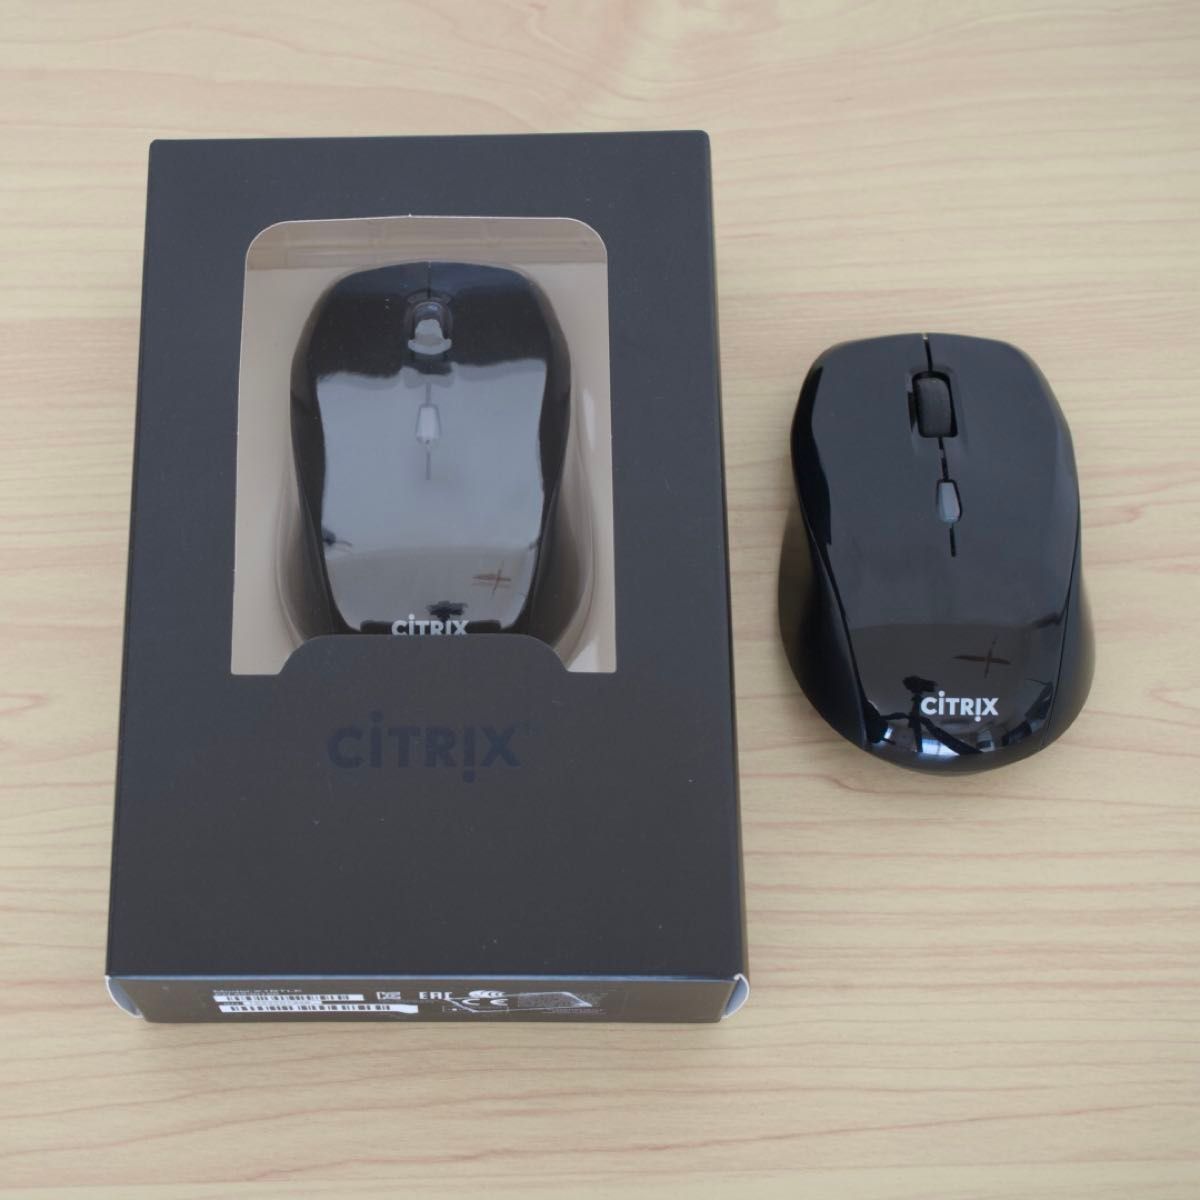 Citrix X1 mouse for iPad 2個